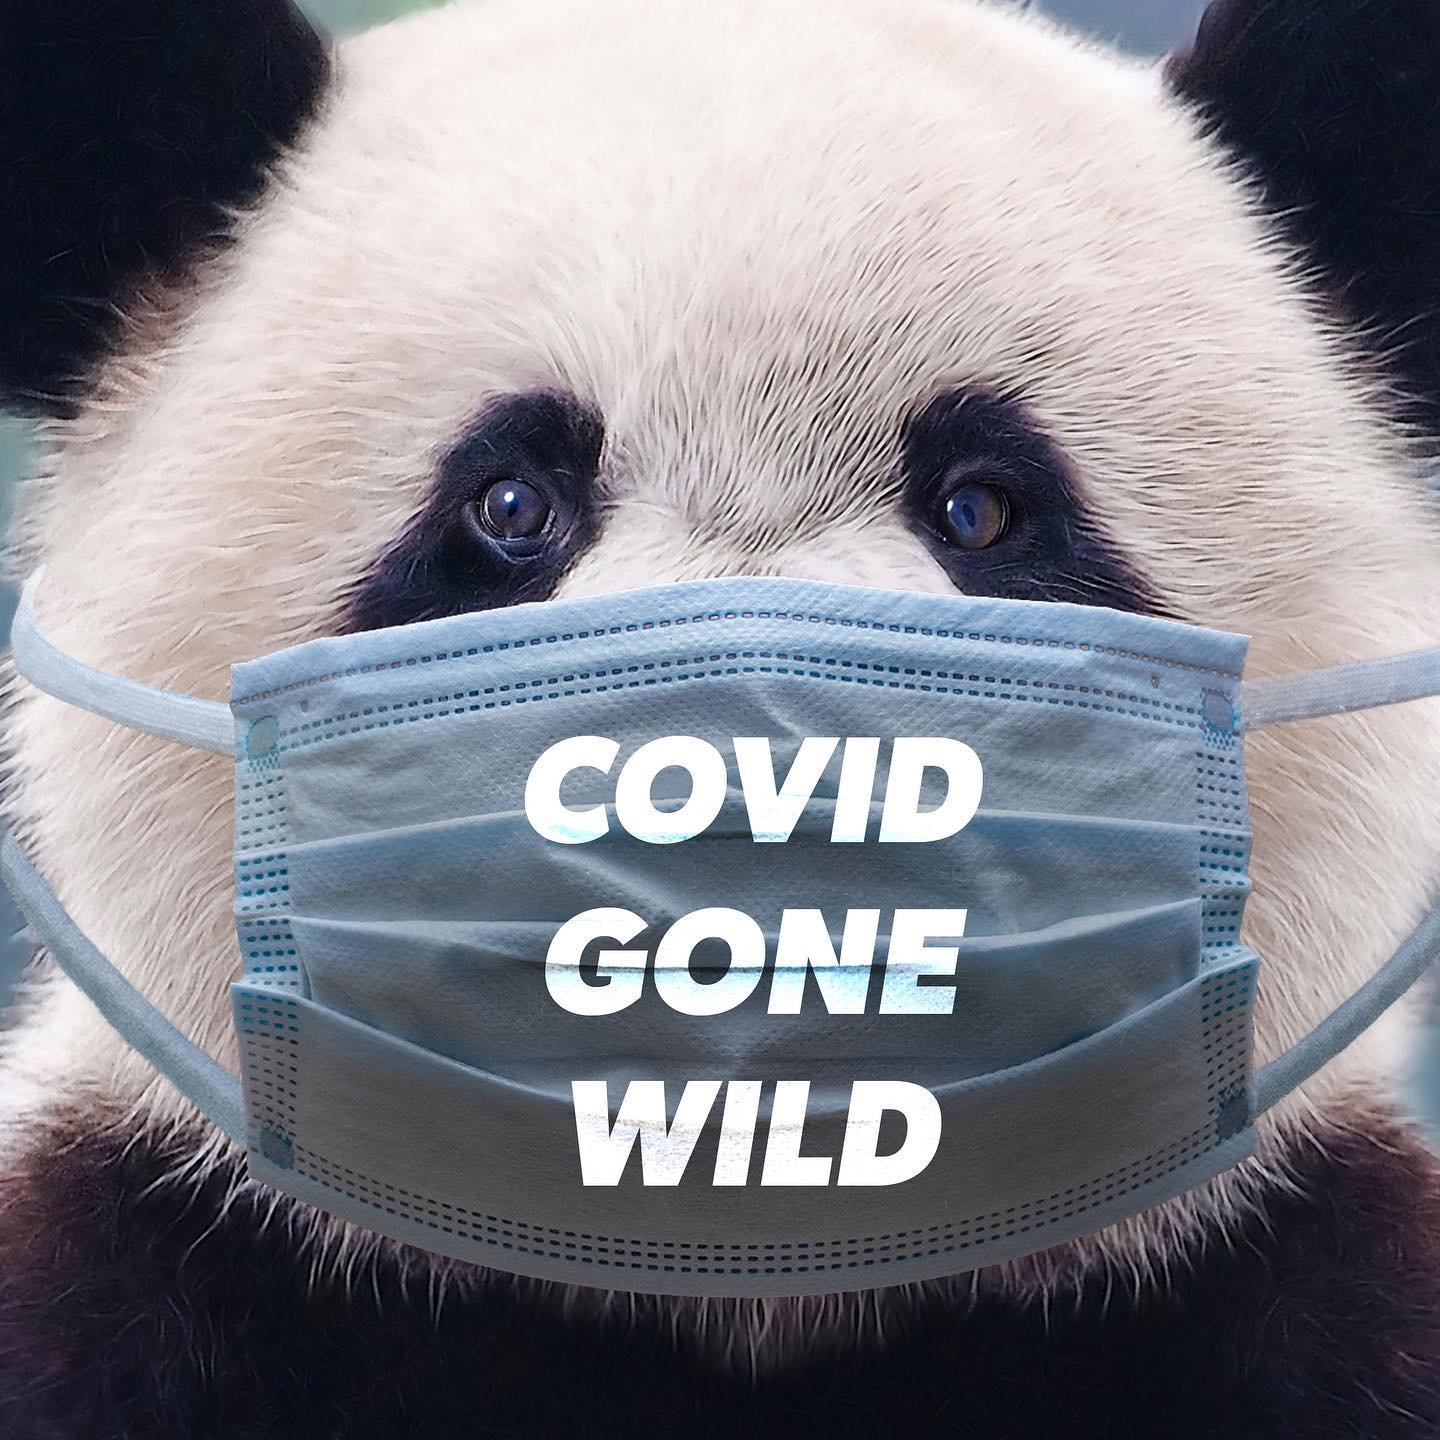 Wear the damn mask. It might save a baby panda. 🐼
⁣
Covid&rsquo;s threat to wildlife cannot be overstated. We&rsquo;ve seen the novel coronavirus jump from humans to big cats, to minks, and back to humans. Imagine a fragile wild population of monkey